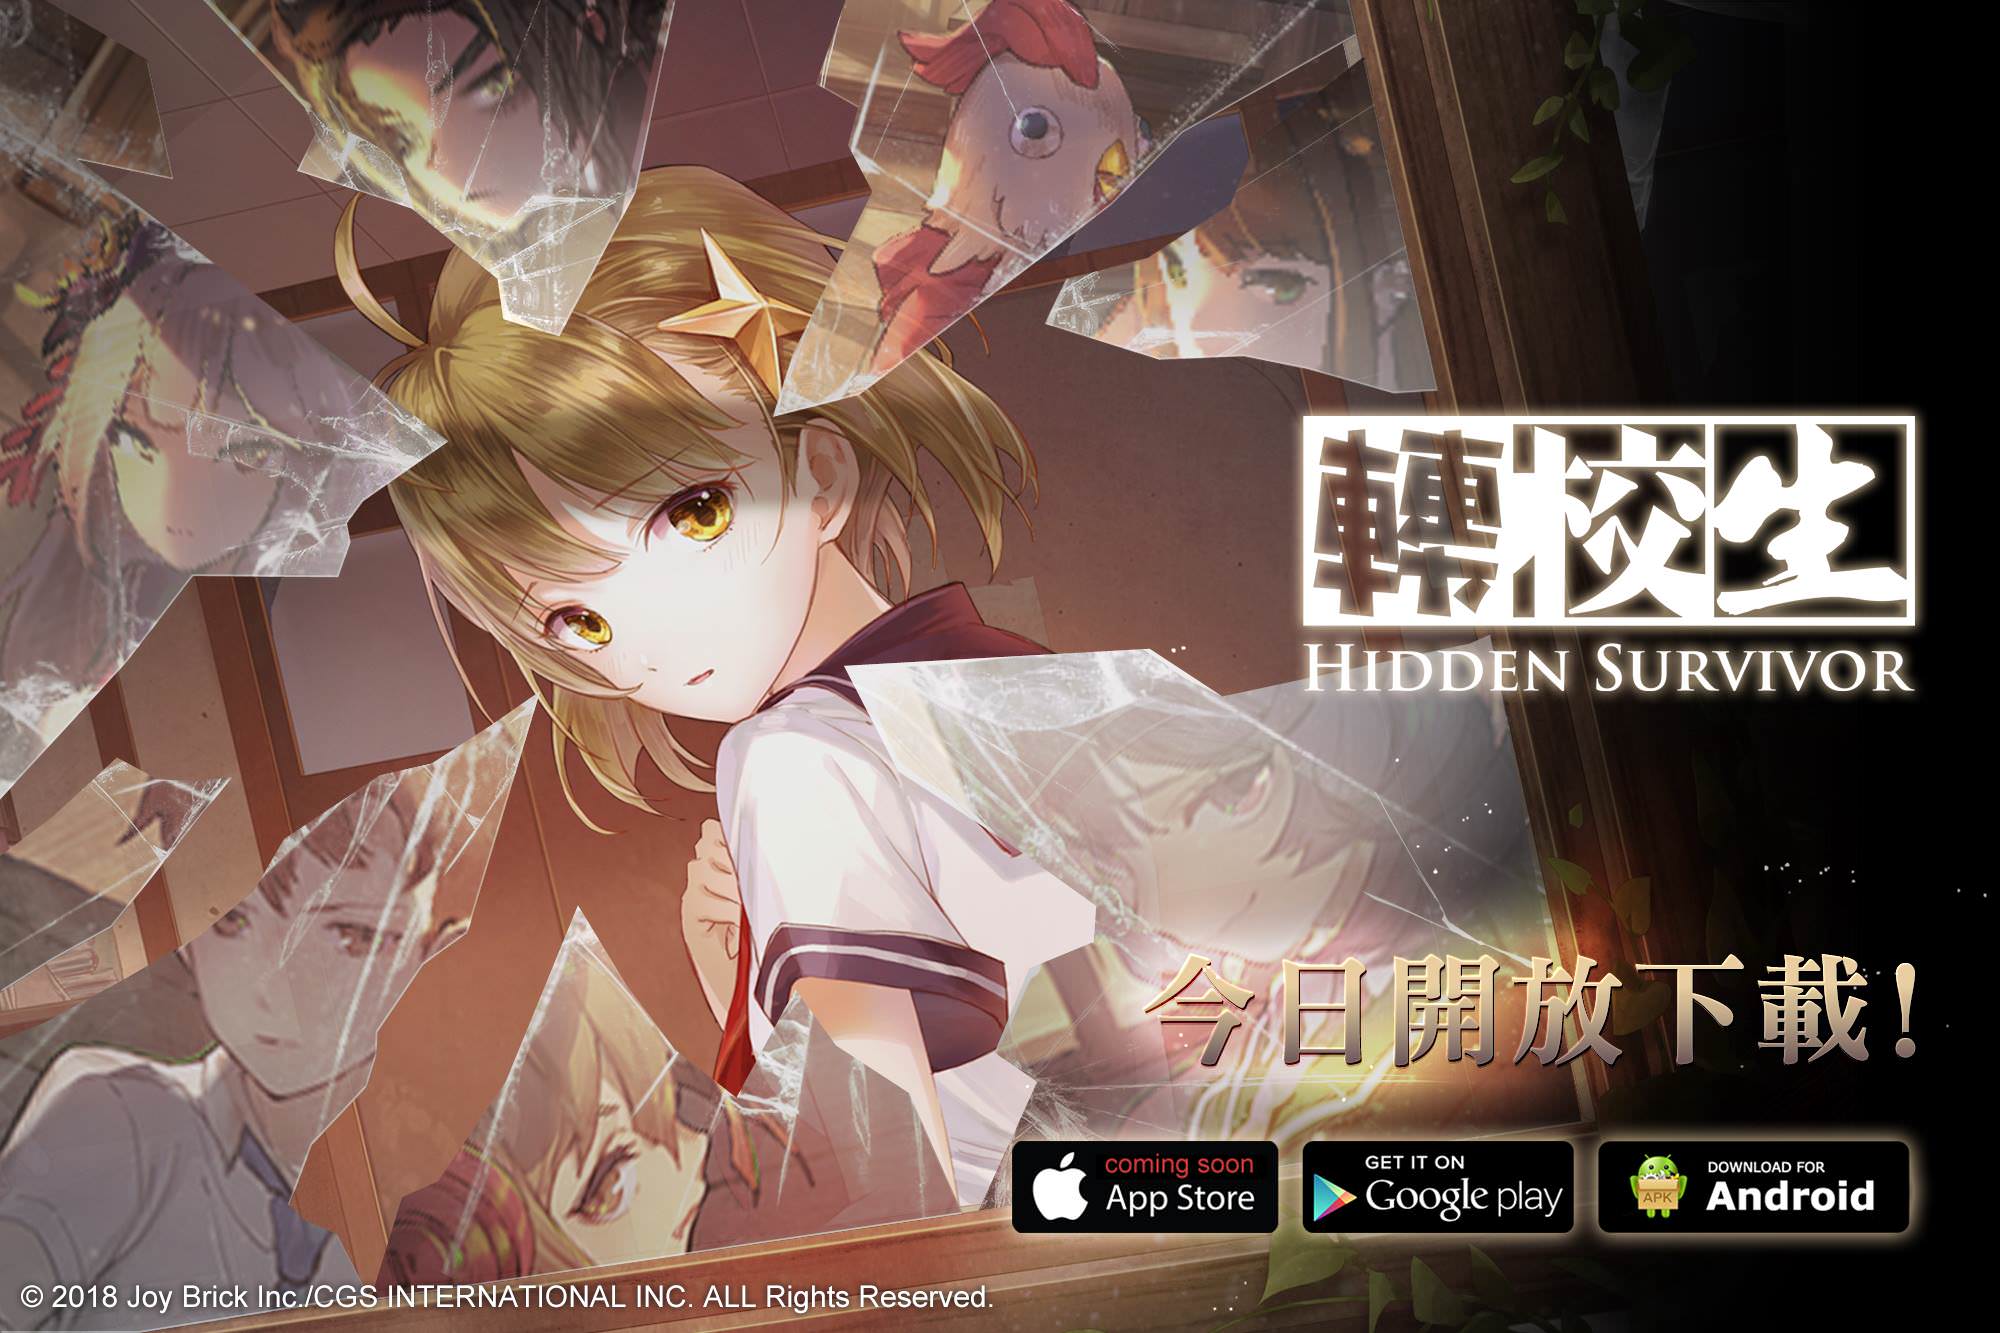 Hidden Survivor is a Hide-and-seek Survival Game Out Right Now on iOS and Android